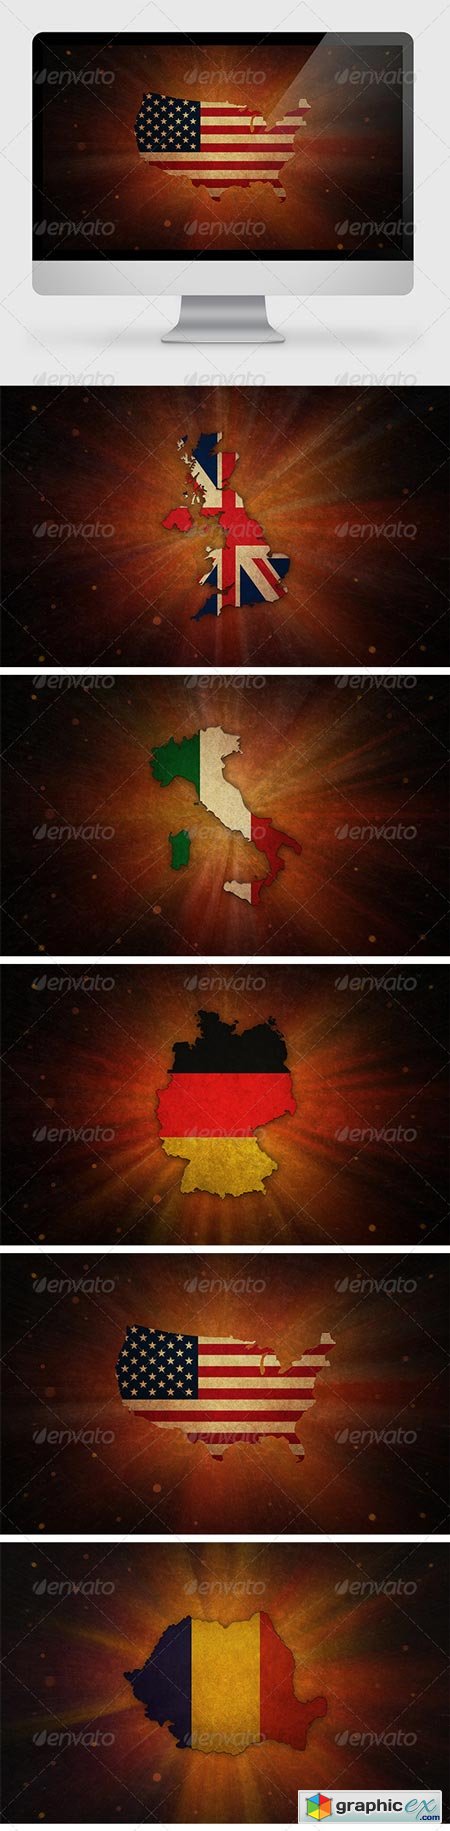 5 Countries Backgrounds 7093719